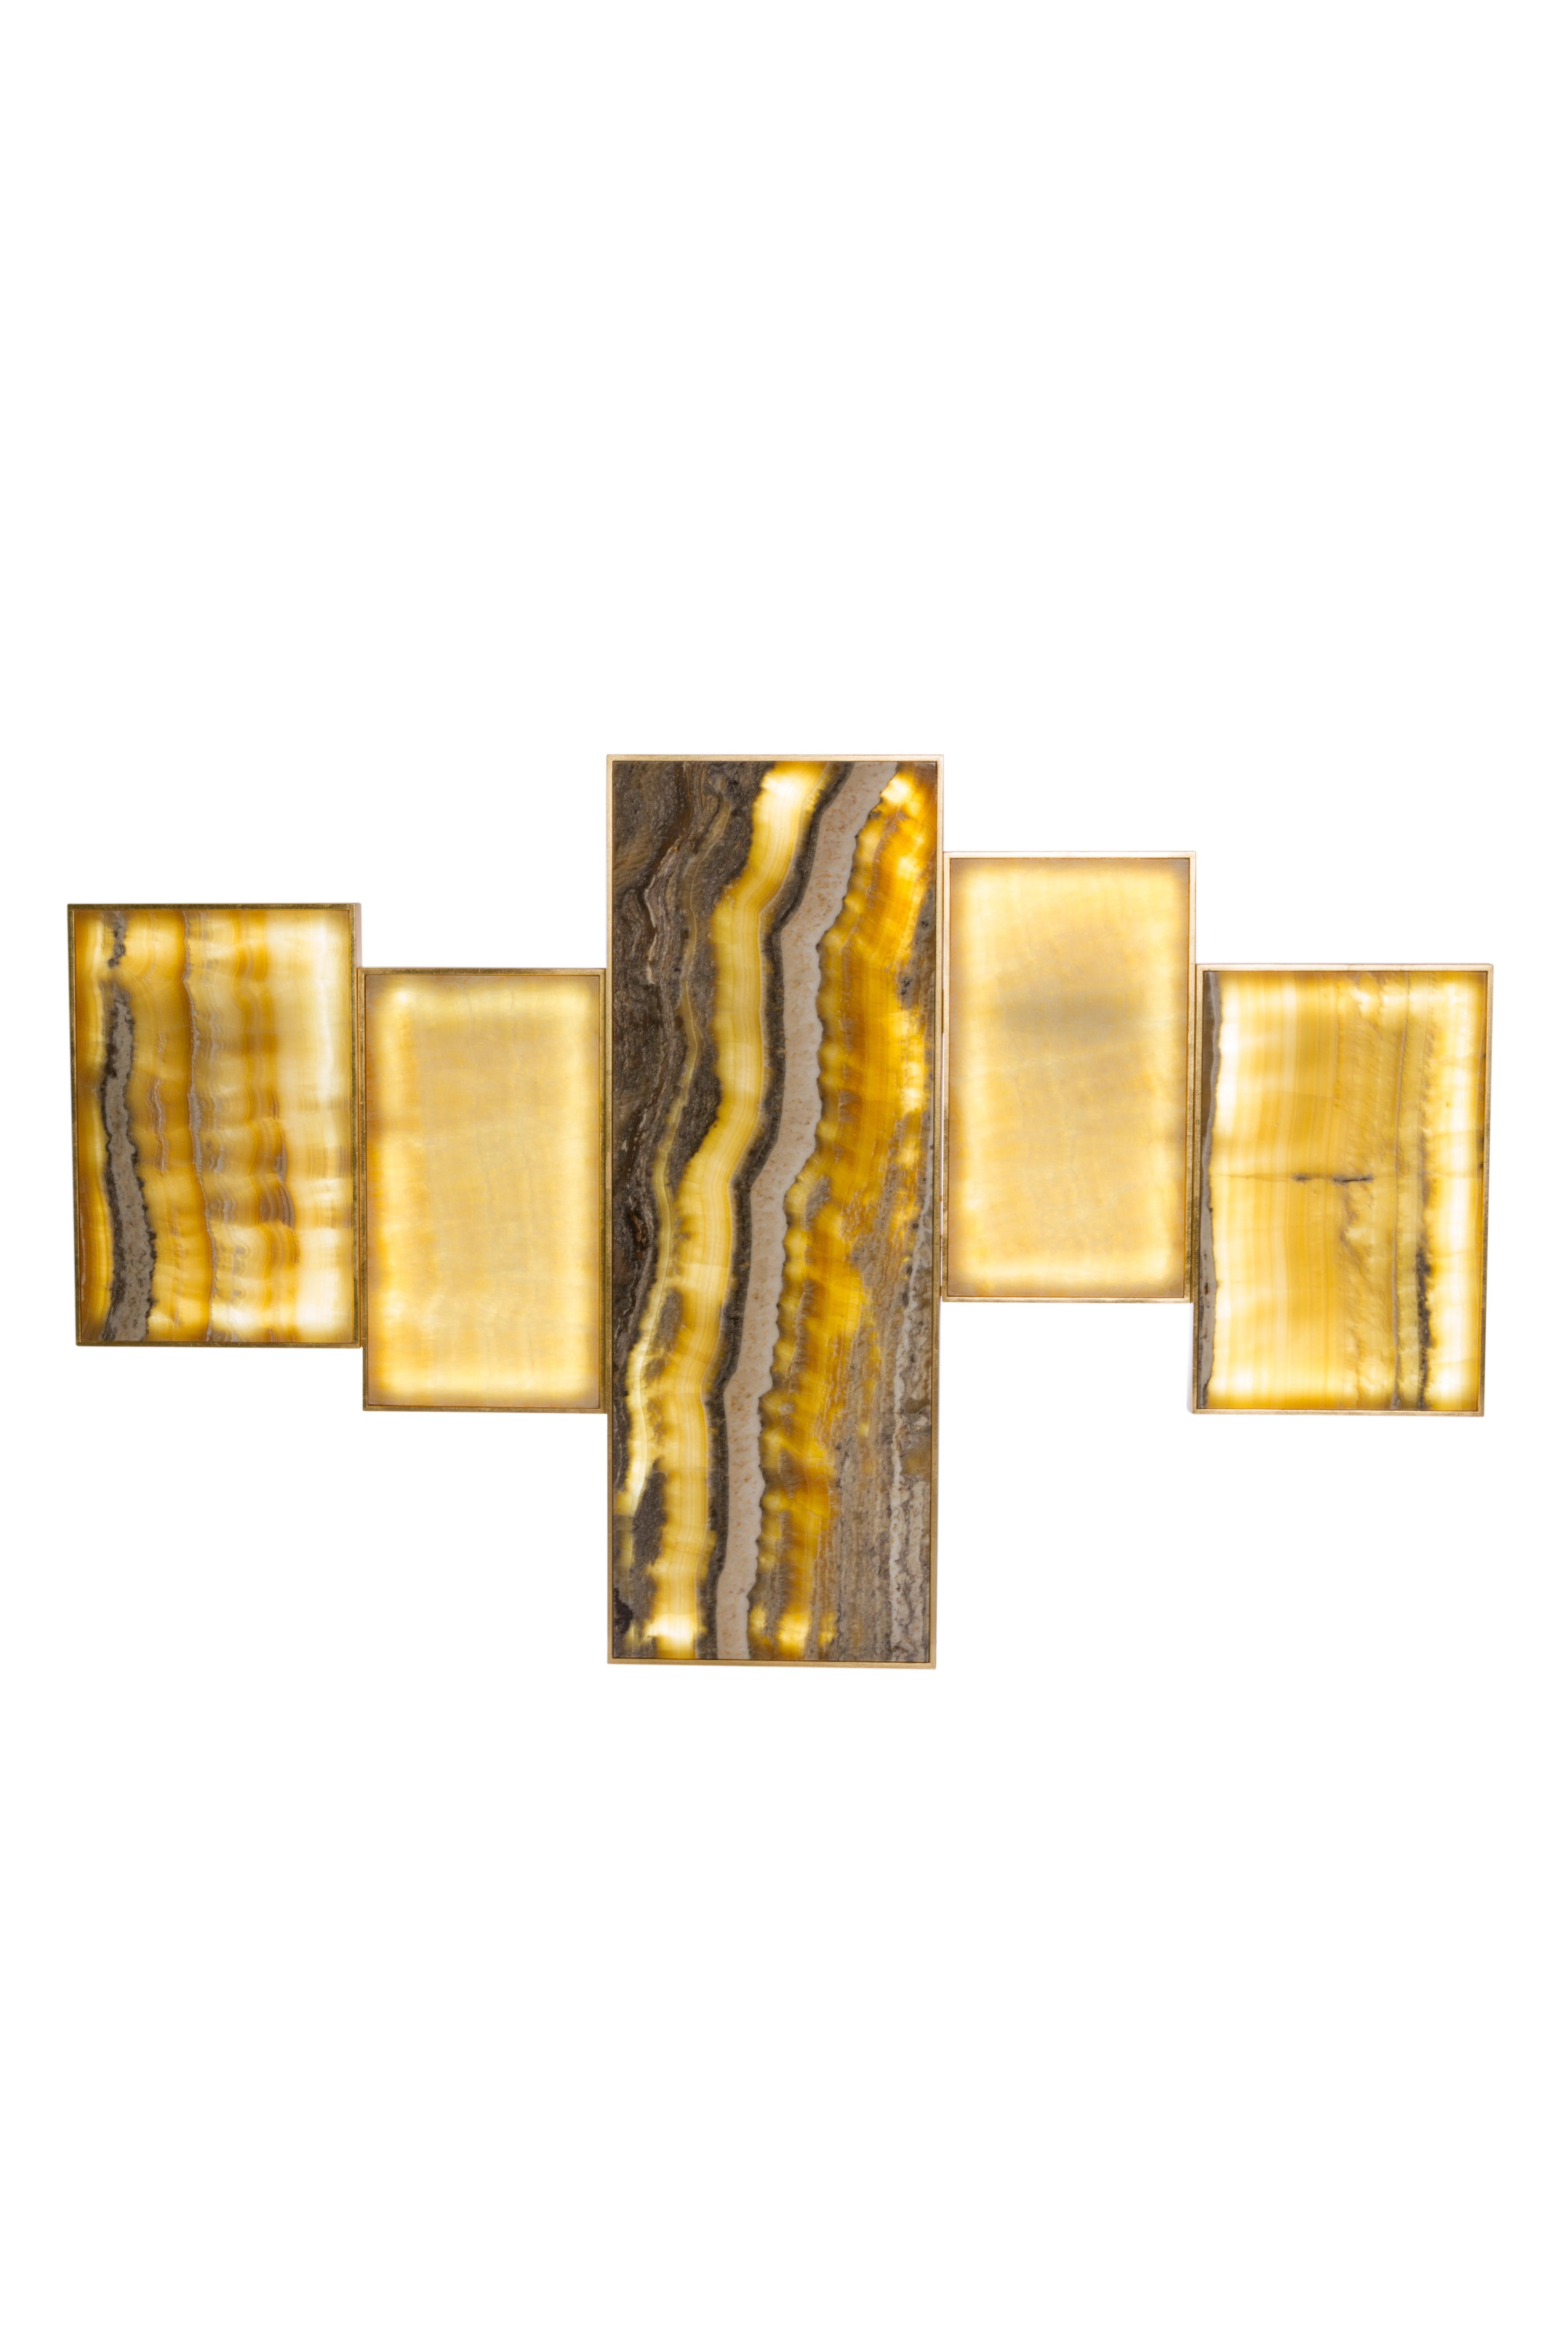 Orpheu Wall Art Piece, Modern Collection, Handcrafted in Portugal - Europe by GF Modern.

Orpheu is a stunning work of art with five interconnected, asymmetrically aligned decorative wall panels of polished Calacatta Lake Sunrise marble. Backlit